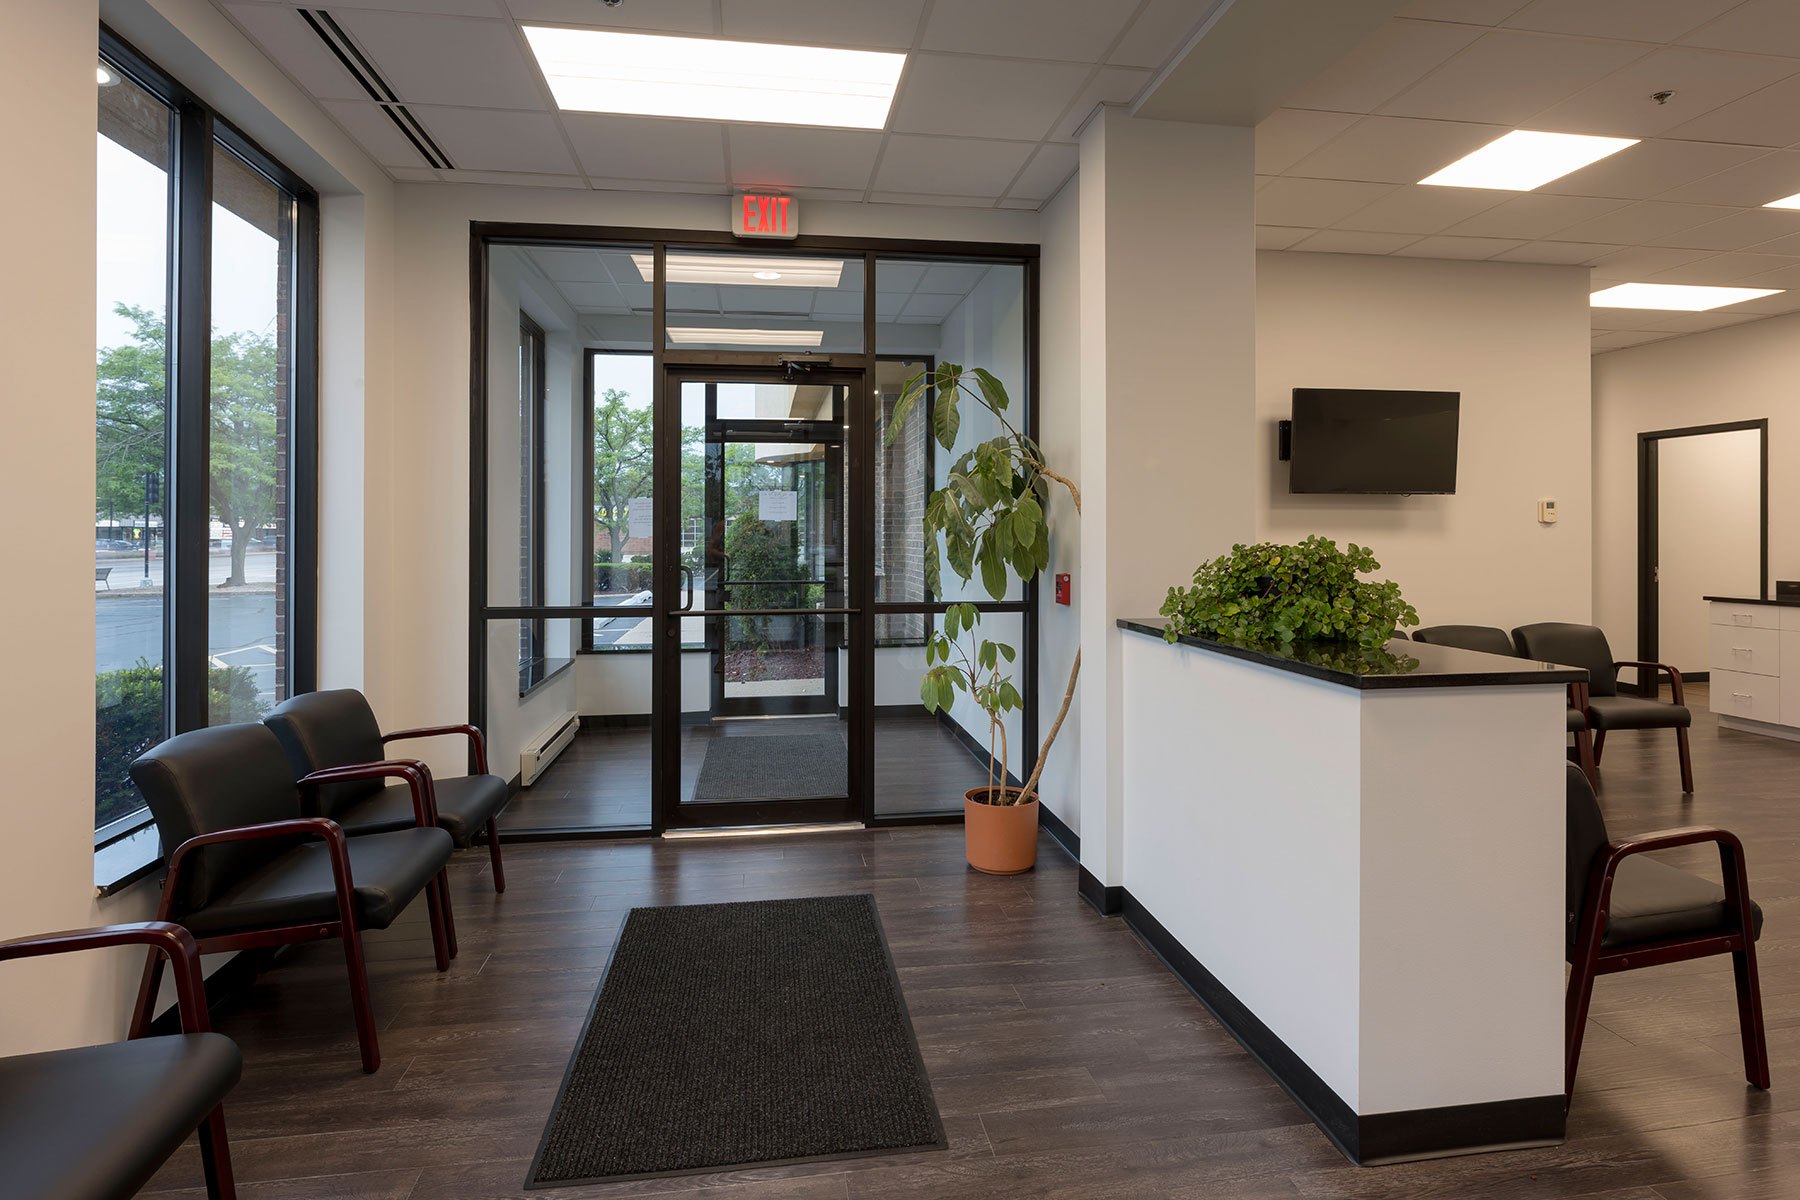 entry door - Advanced Skin & MOHS Surgery Clinics, Morton Grove Custom Home. America's Custom Home Builders: New Construction, Remodeling, Restoration Services. Residential and Commercial.